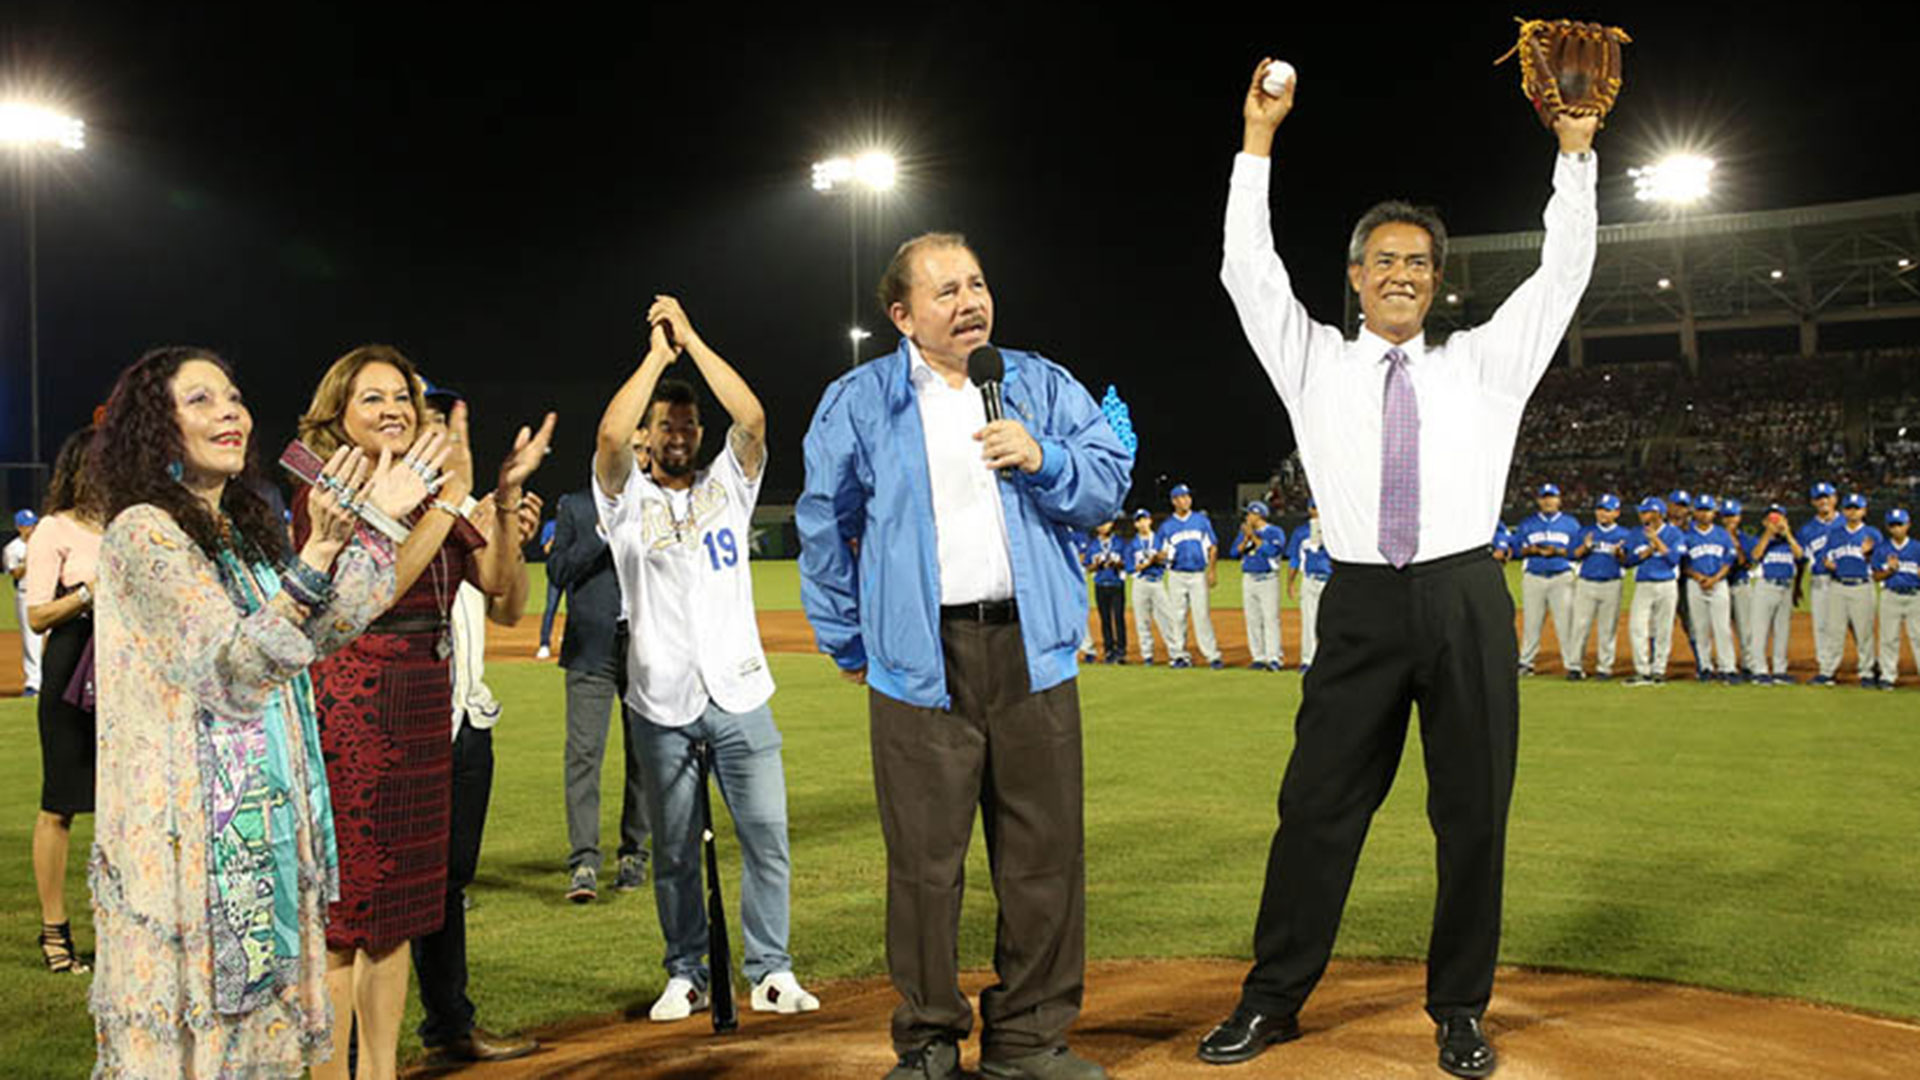 Dennis Martínez threw the first pitch to inaugurate the stadium in October 2017. (Photo 19 Digital)